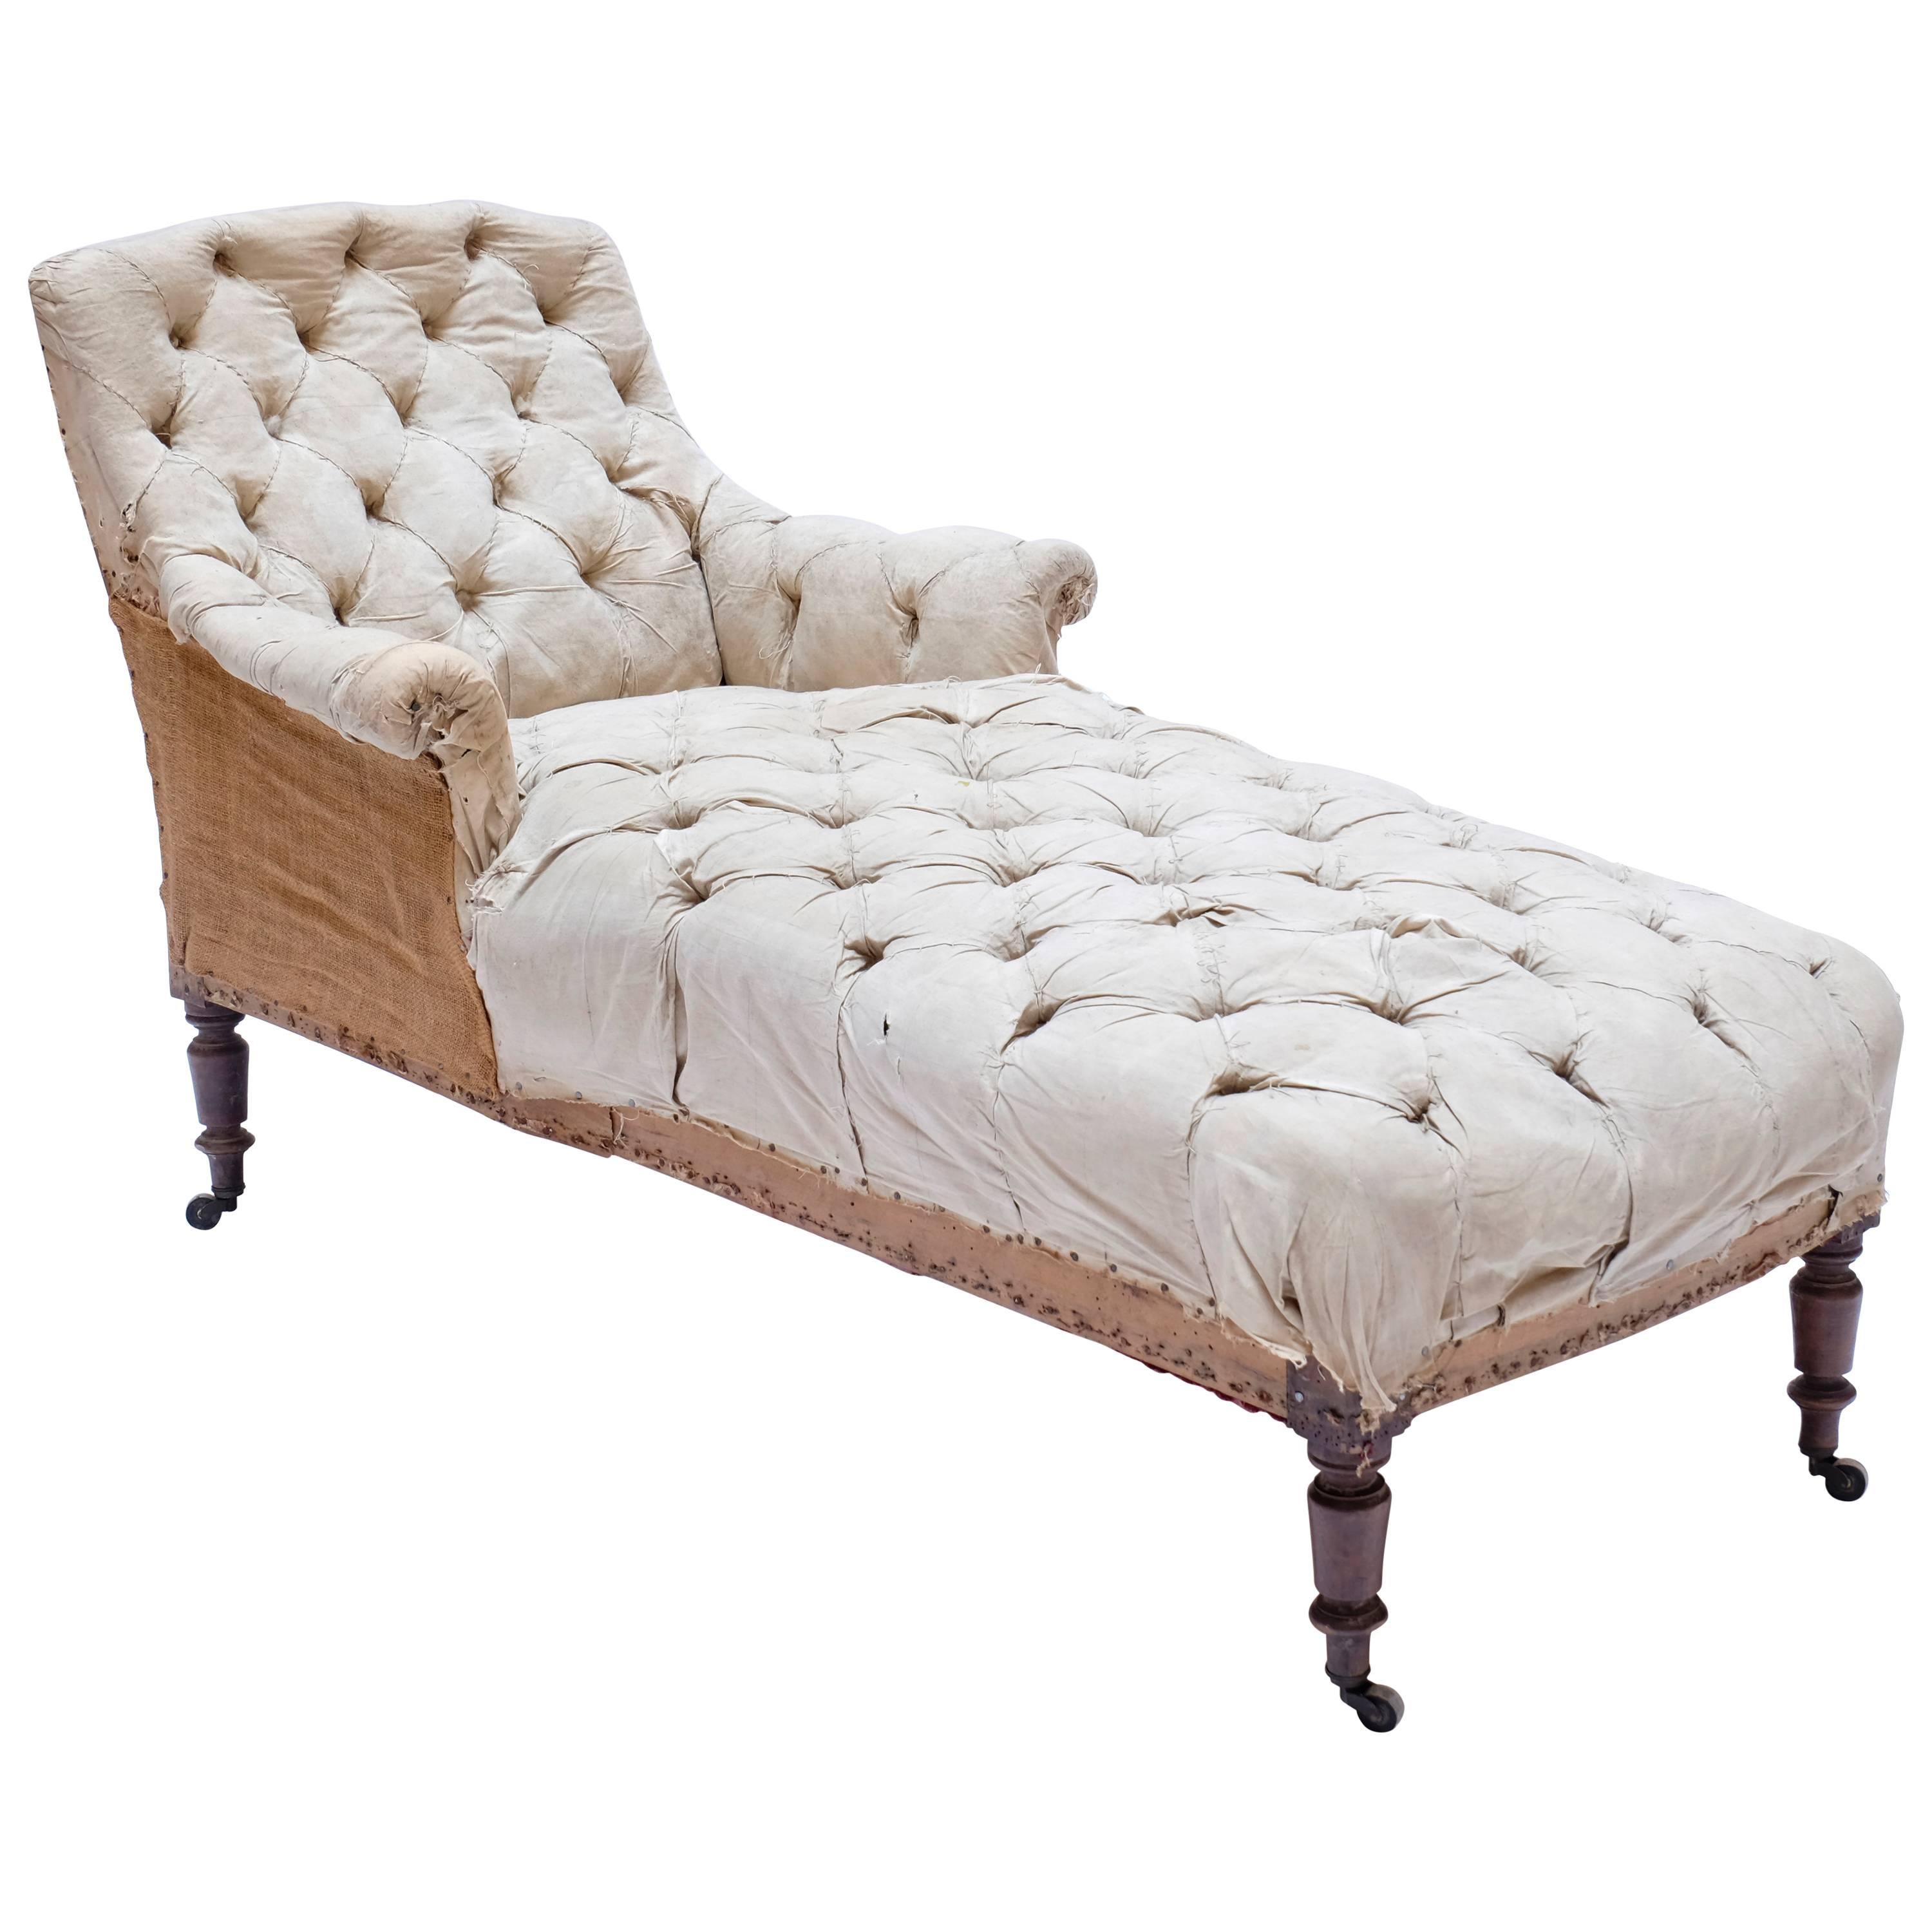 19th Century French Chaise Longue with Capitone